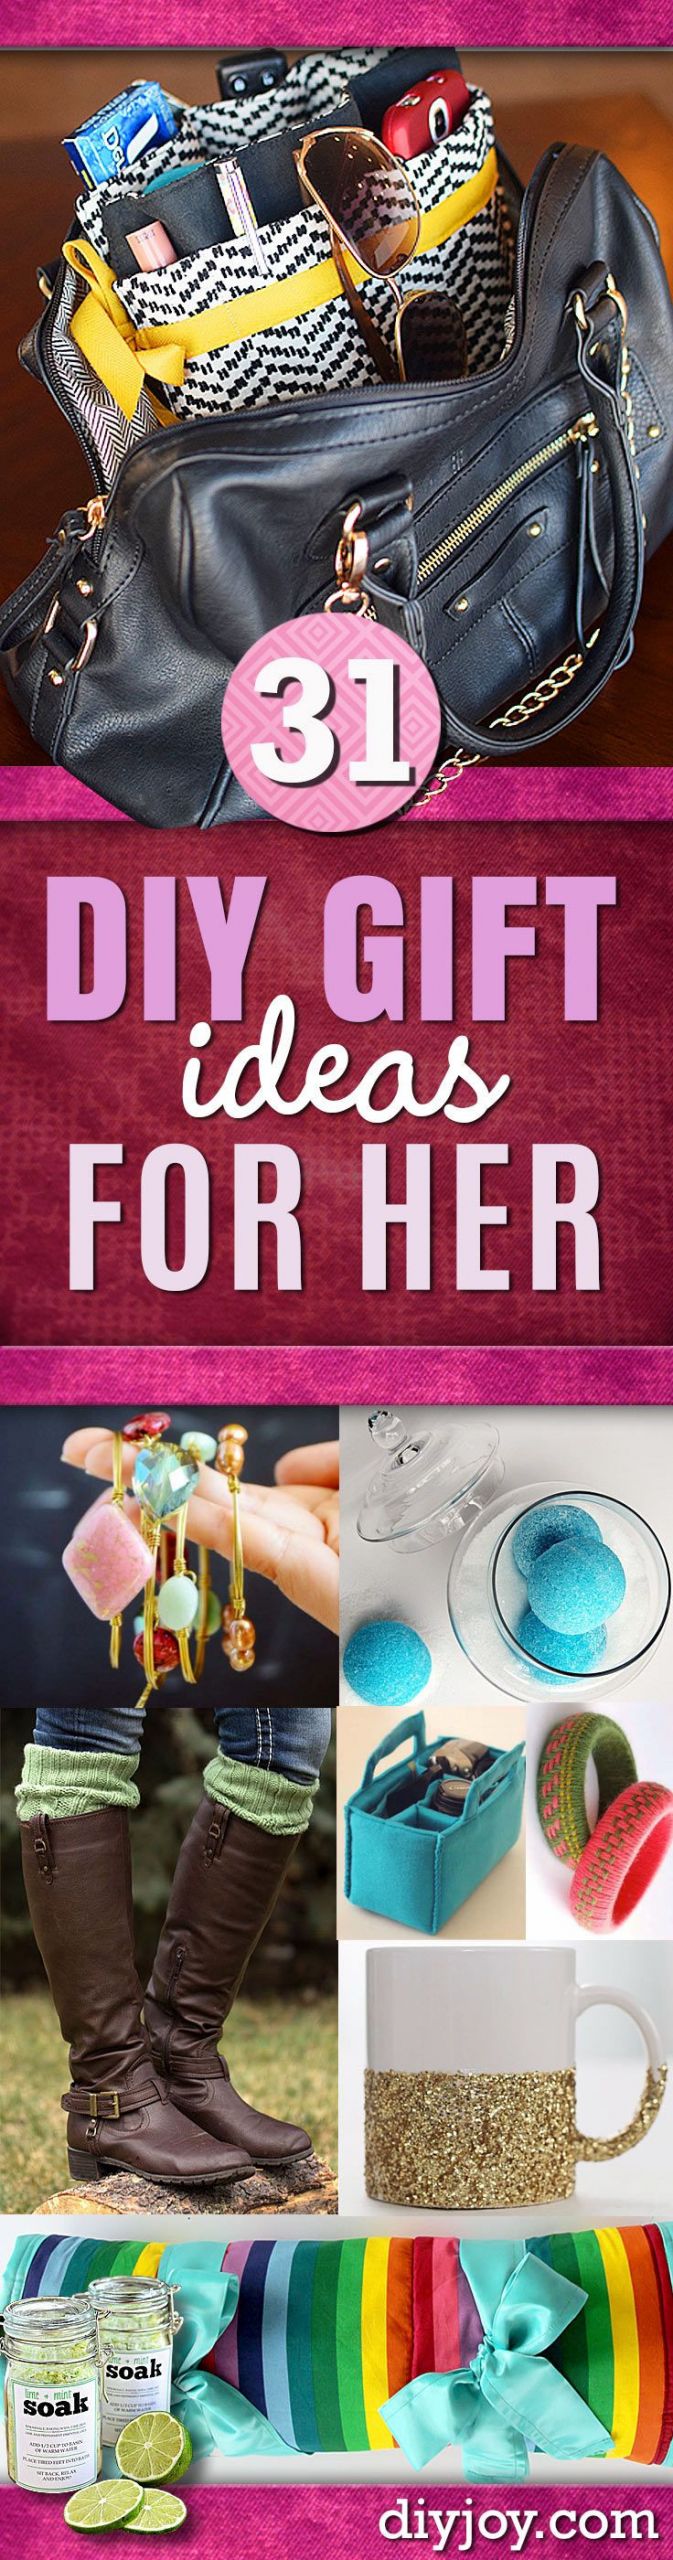 Simple Gift Ideas For Girlfriend
 DIY Gift Ideas for Her